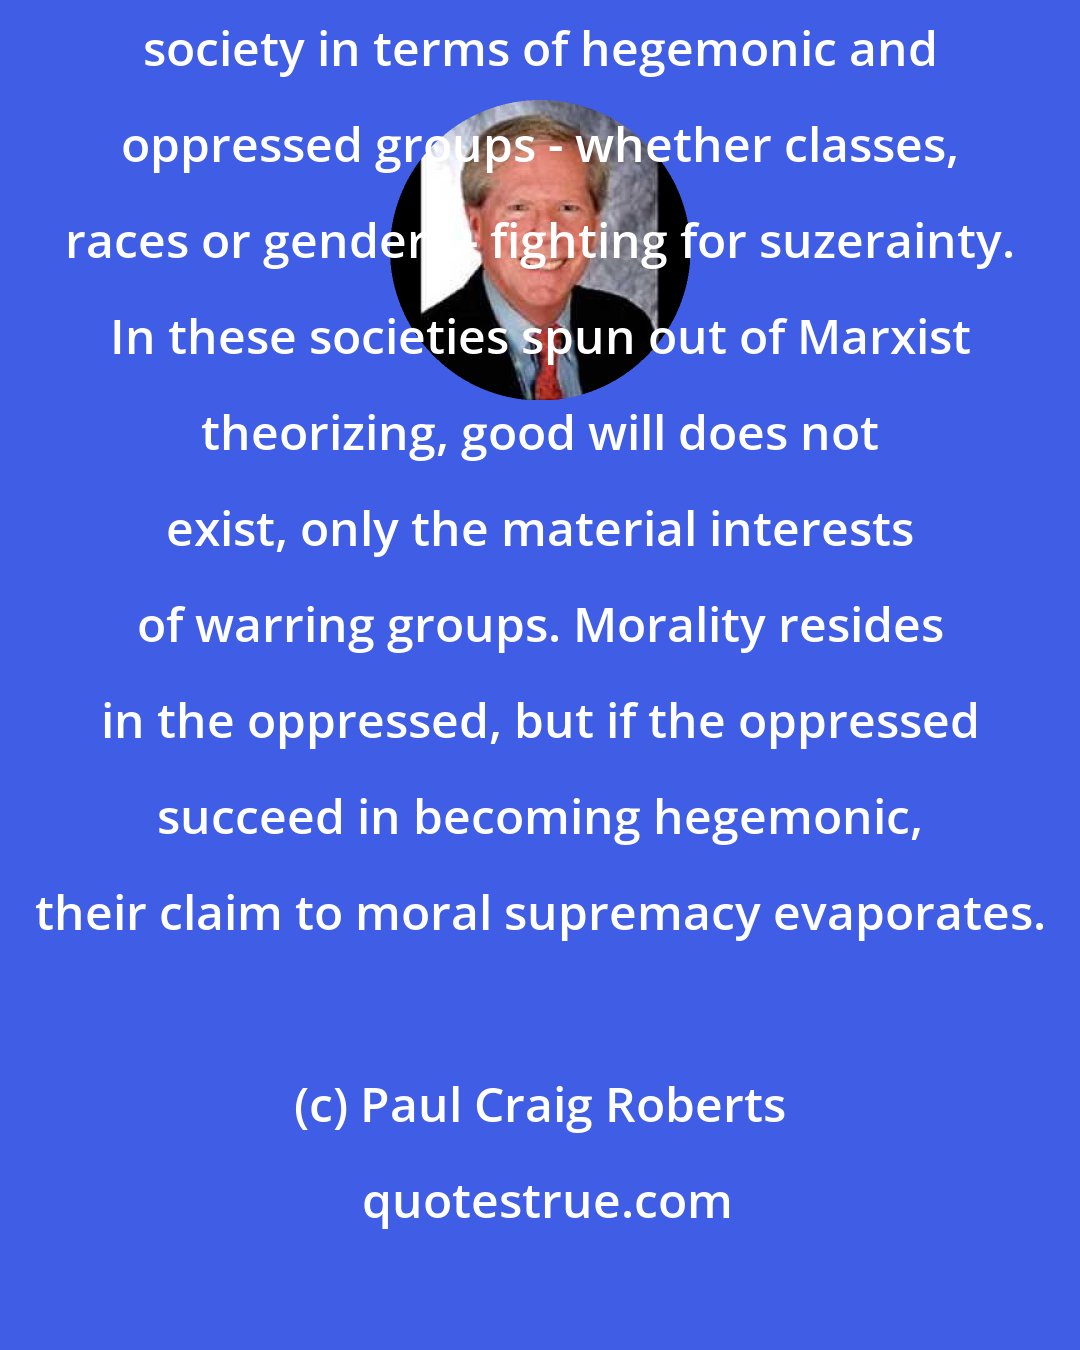 Paul Craig Roberts: American liberty is being destroyed by Marxist doctrines that explain society in terms of hegemonic and oppressed groups - whether classes, races or genders - fighting for suzerainty. In these societies spun out of Marxist theorizing, good will does not exist, only the material interests of warring groups. Morality resides in the oppressed, but if the oppressed succeed in becoming hegemonic, their claim to moral supremacy evaporates.